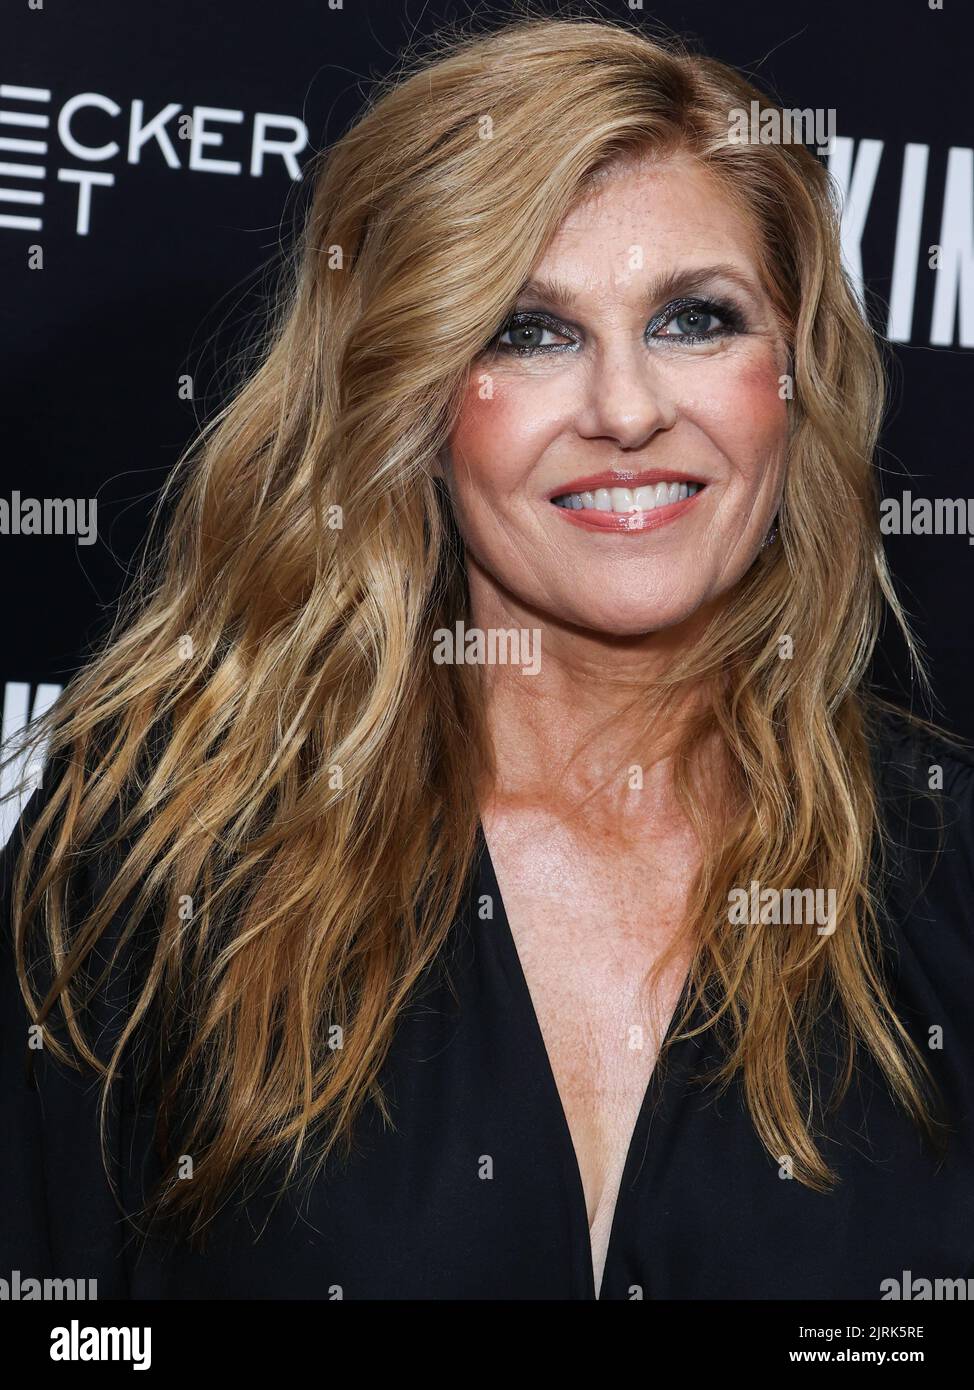 West Hollywood, United States. 24th Aug, 2022. WEST HOLLYWOOD, LOS ANGELES, CALIFORNIA, USA - AUGUST 24: American actress Connie Britton arrives at the Los Angeles Special Screening Of Bleecker Street Media's 'Breaking' held at The London Hotel West Hollywood at Beverly Hills on August 24, 2022 in West Hollywood, Los Angeles, California, United States. (Photo by Xavier Collin/Image Press Agency) Credit: Image Press Agency/Alamy Live News Stock Photo